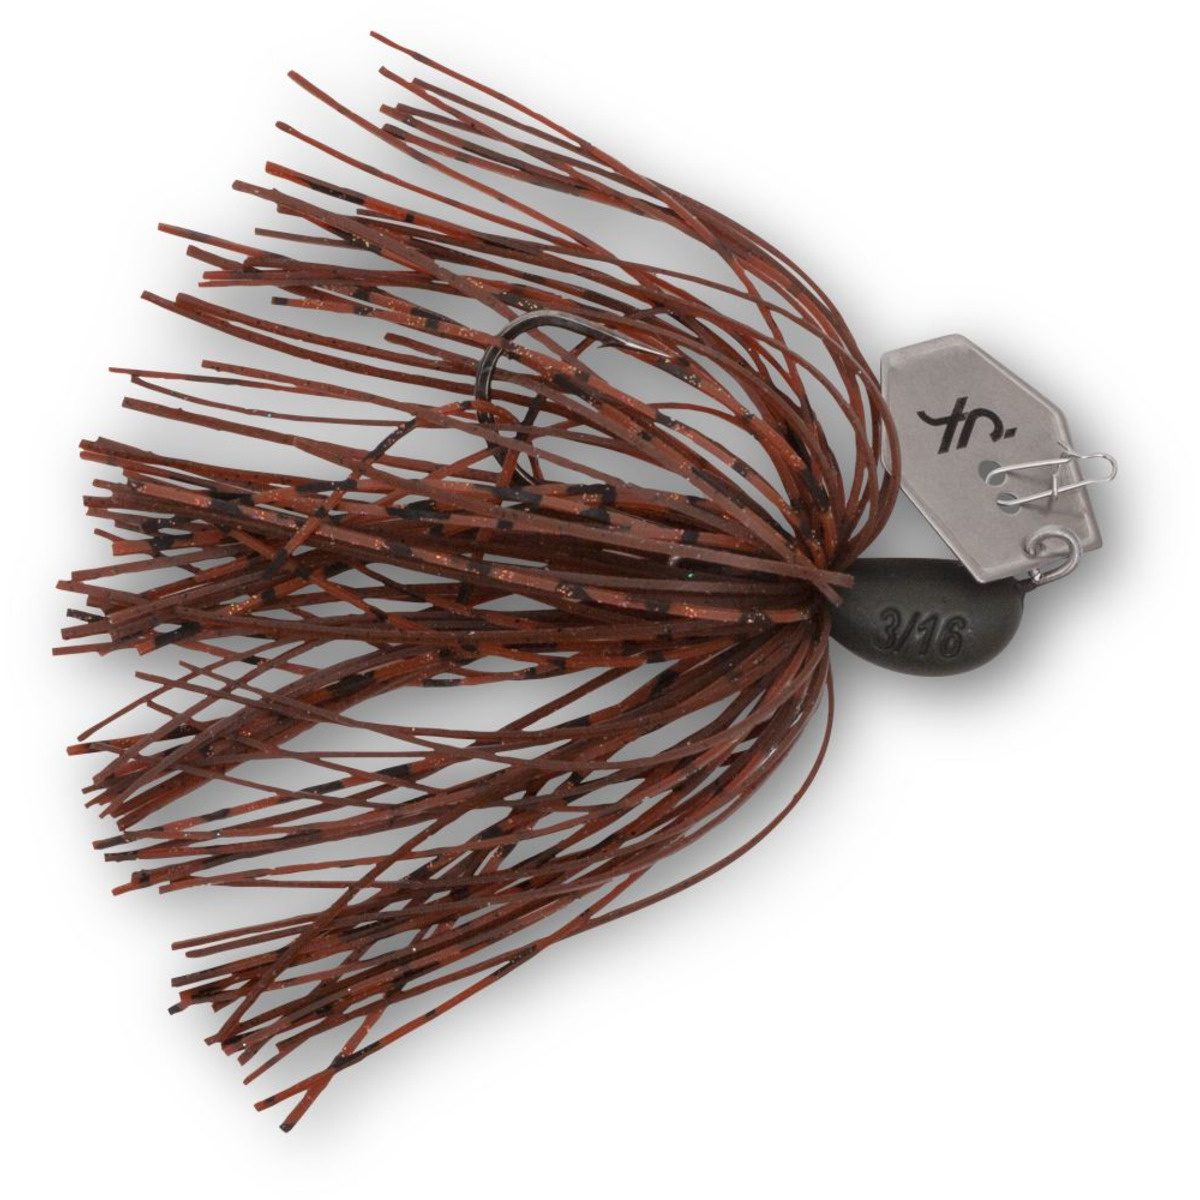 Quantum 4street Chatter - 5 g - brown craw